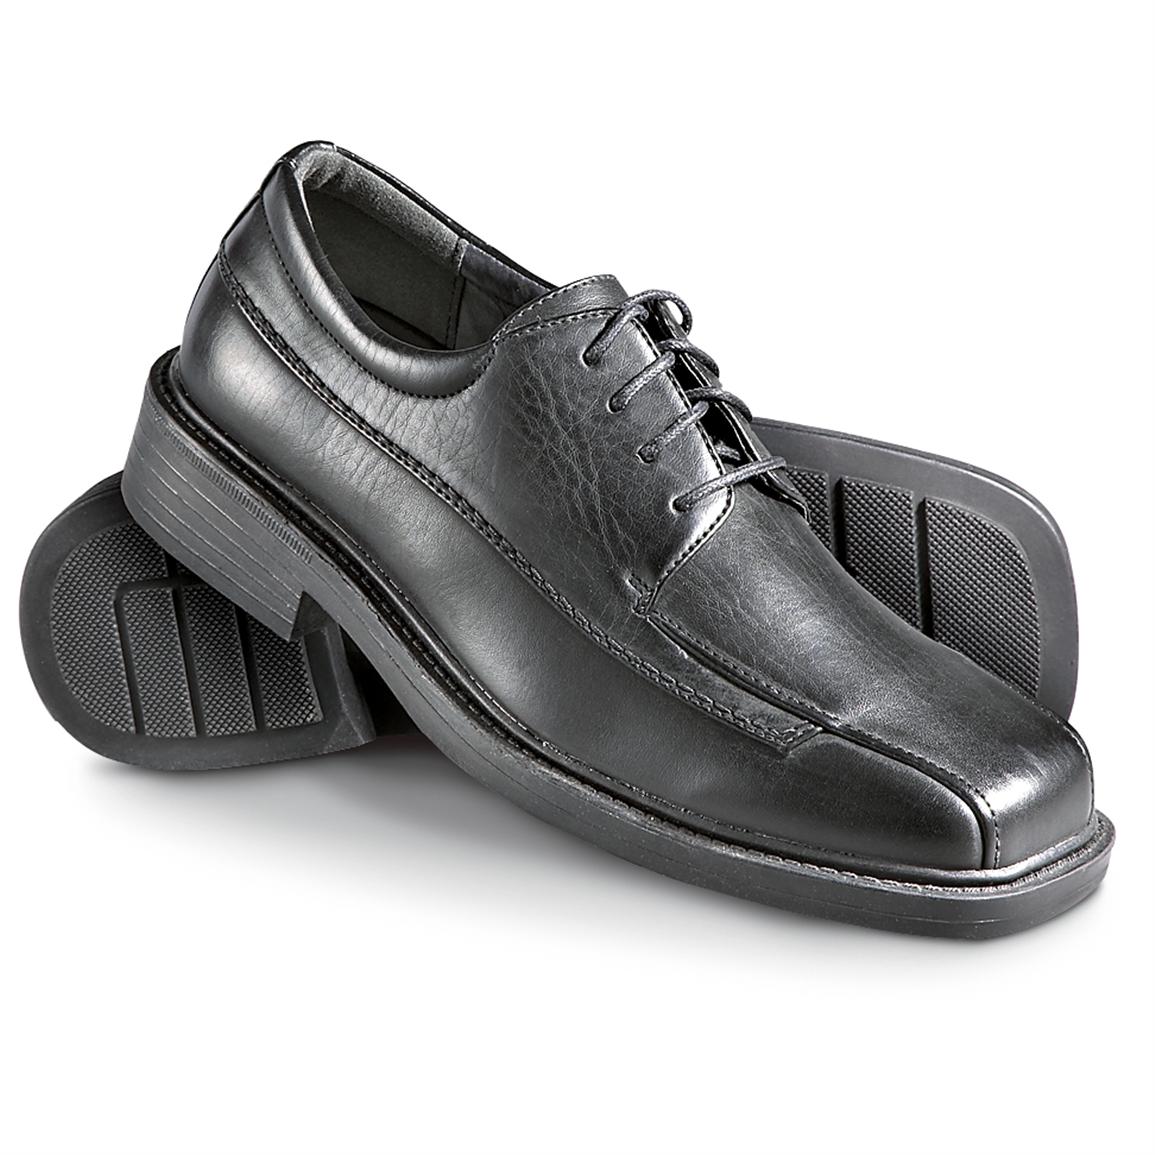 Men's Soft Stags® Serano Shoes, Black - 183631, Dress Shoes at ...